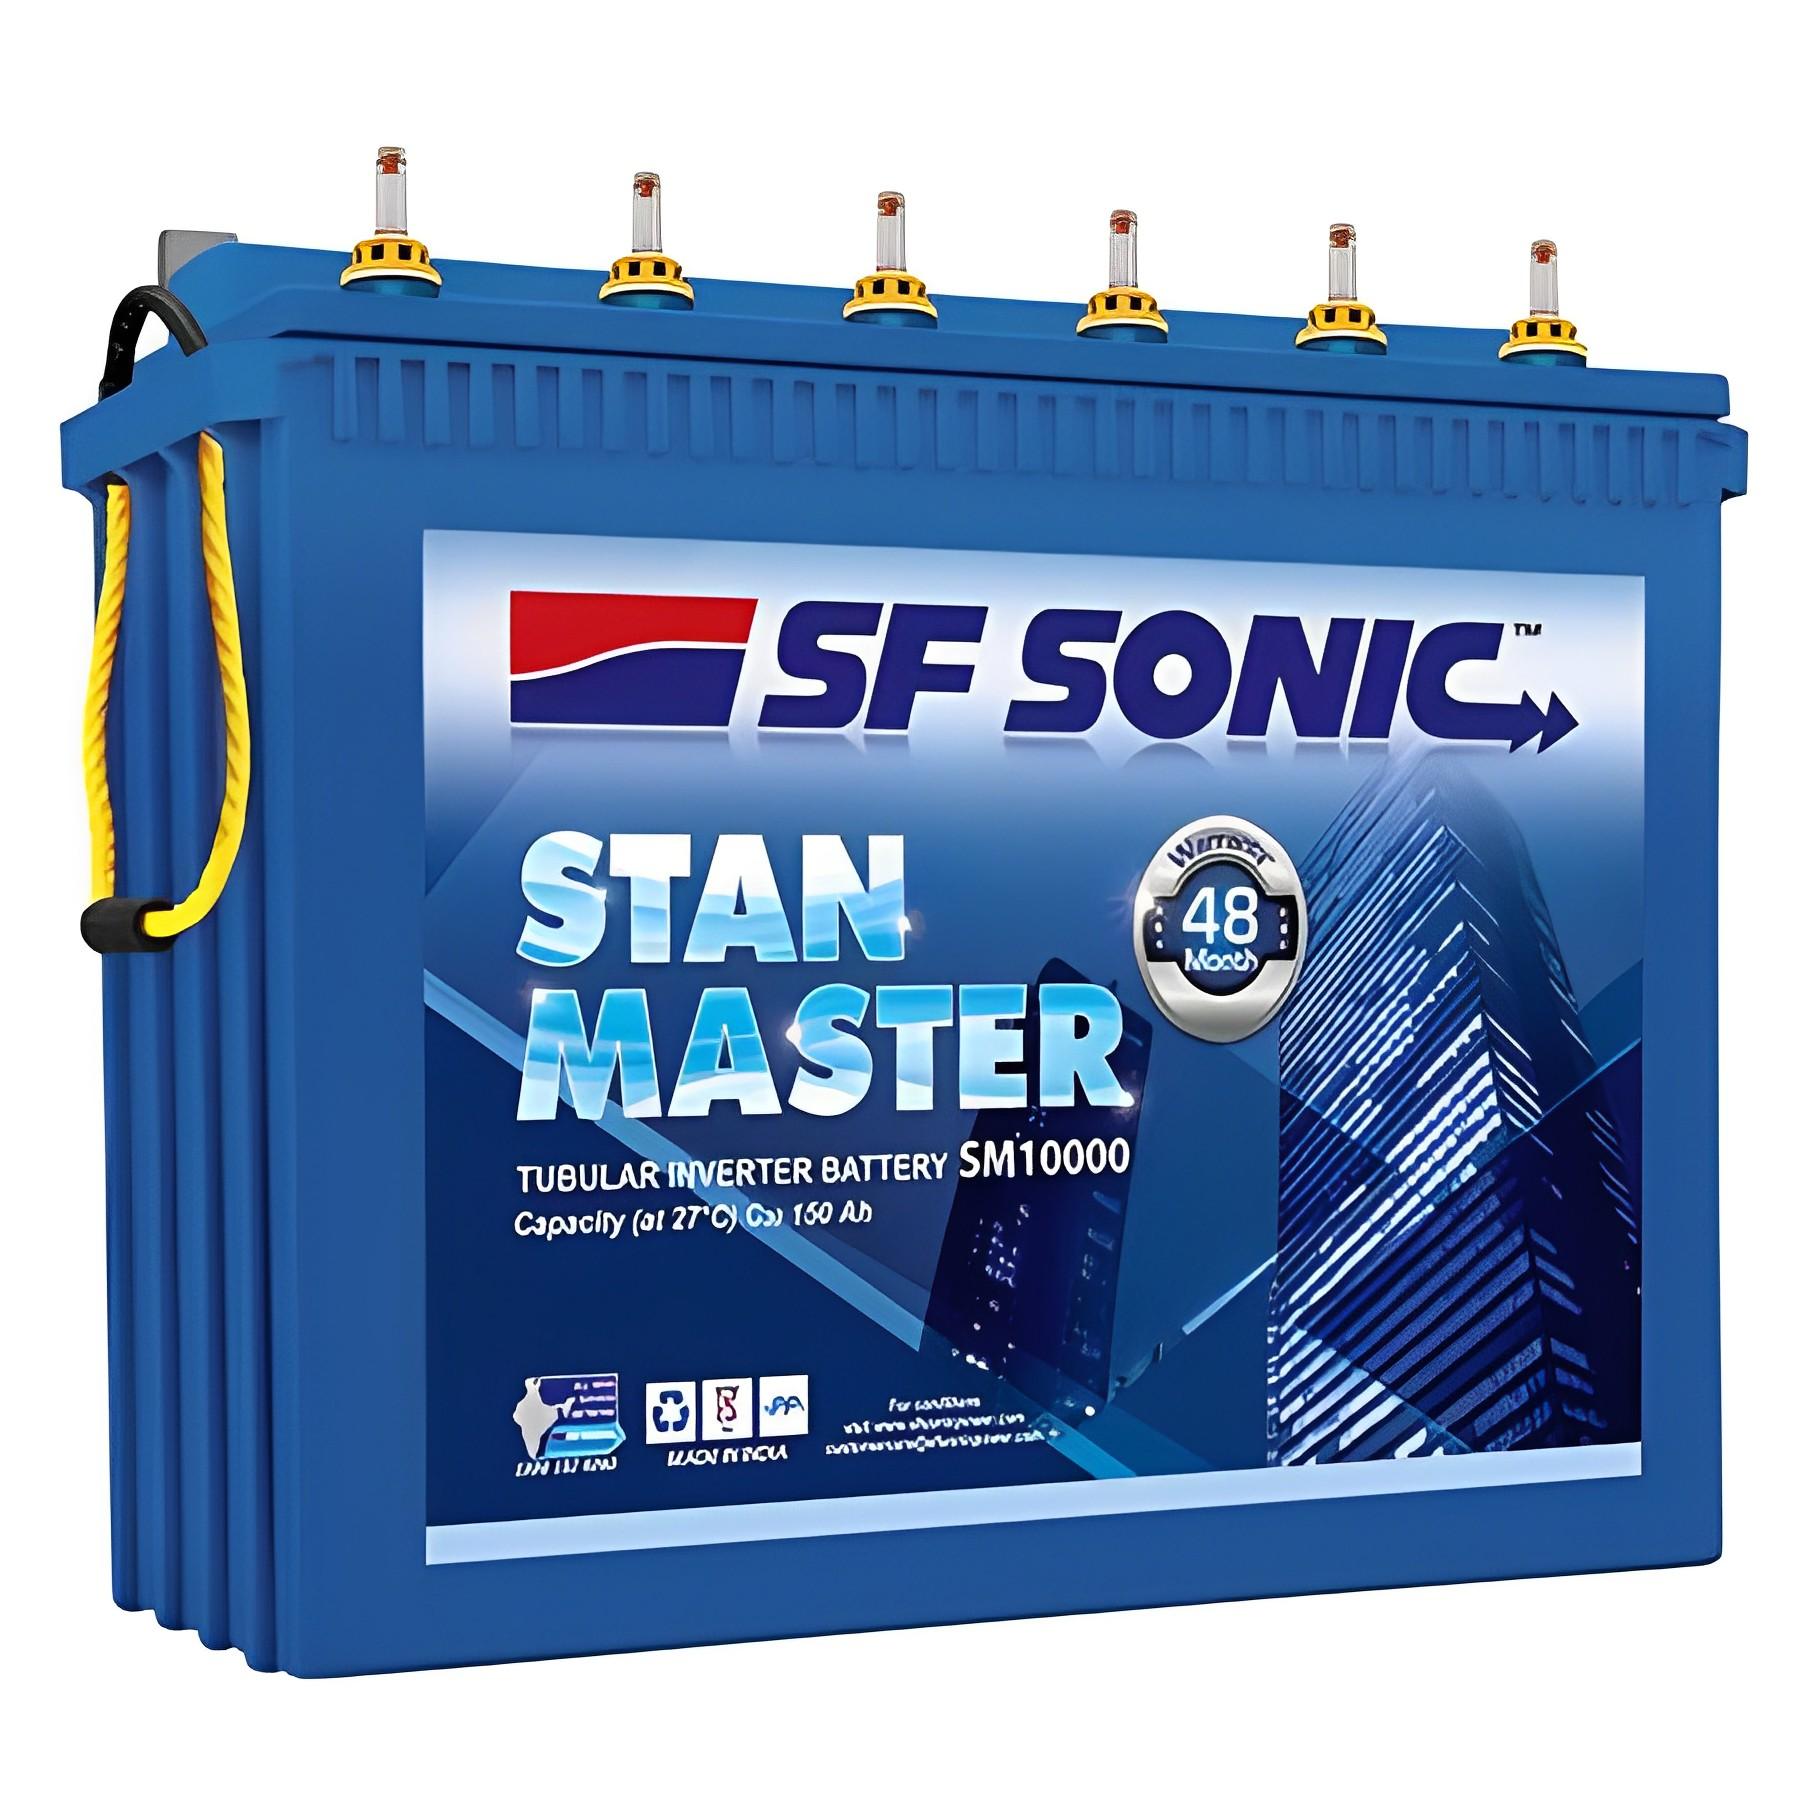 Catalogue - SF Sonic Batteries in Nagpur GPO, Nagpur - Justdial